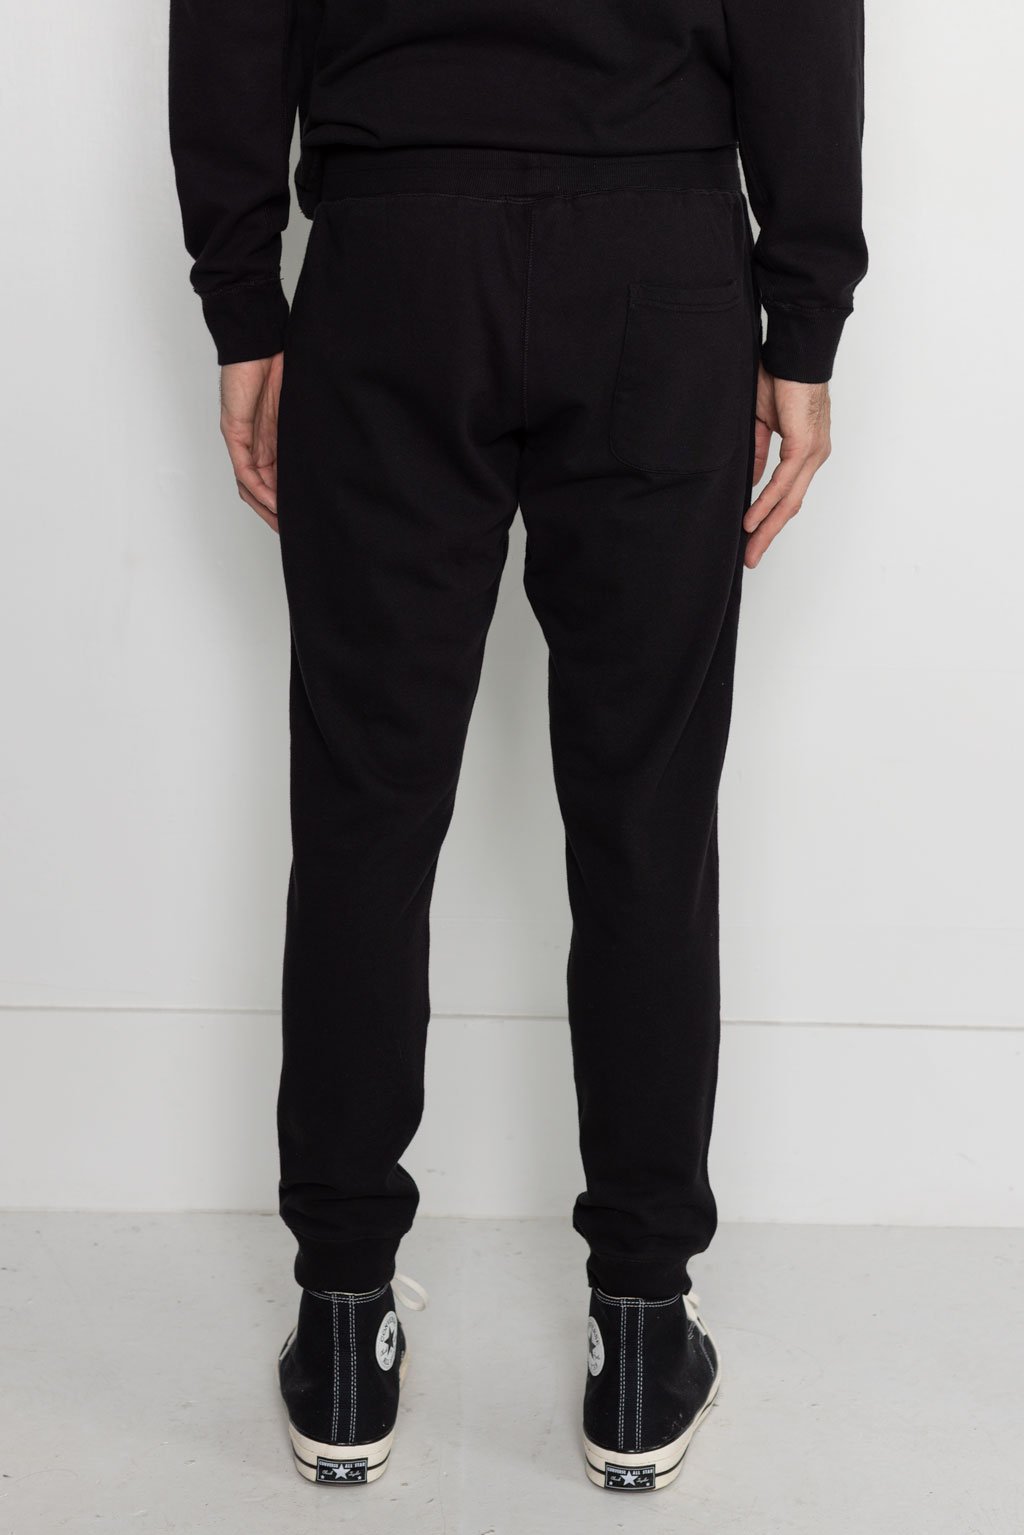 NS2167-1 250g French Terry Sweatpants in Black 03